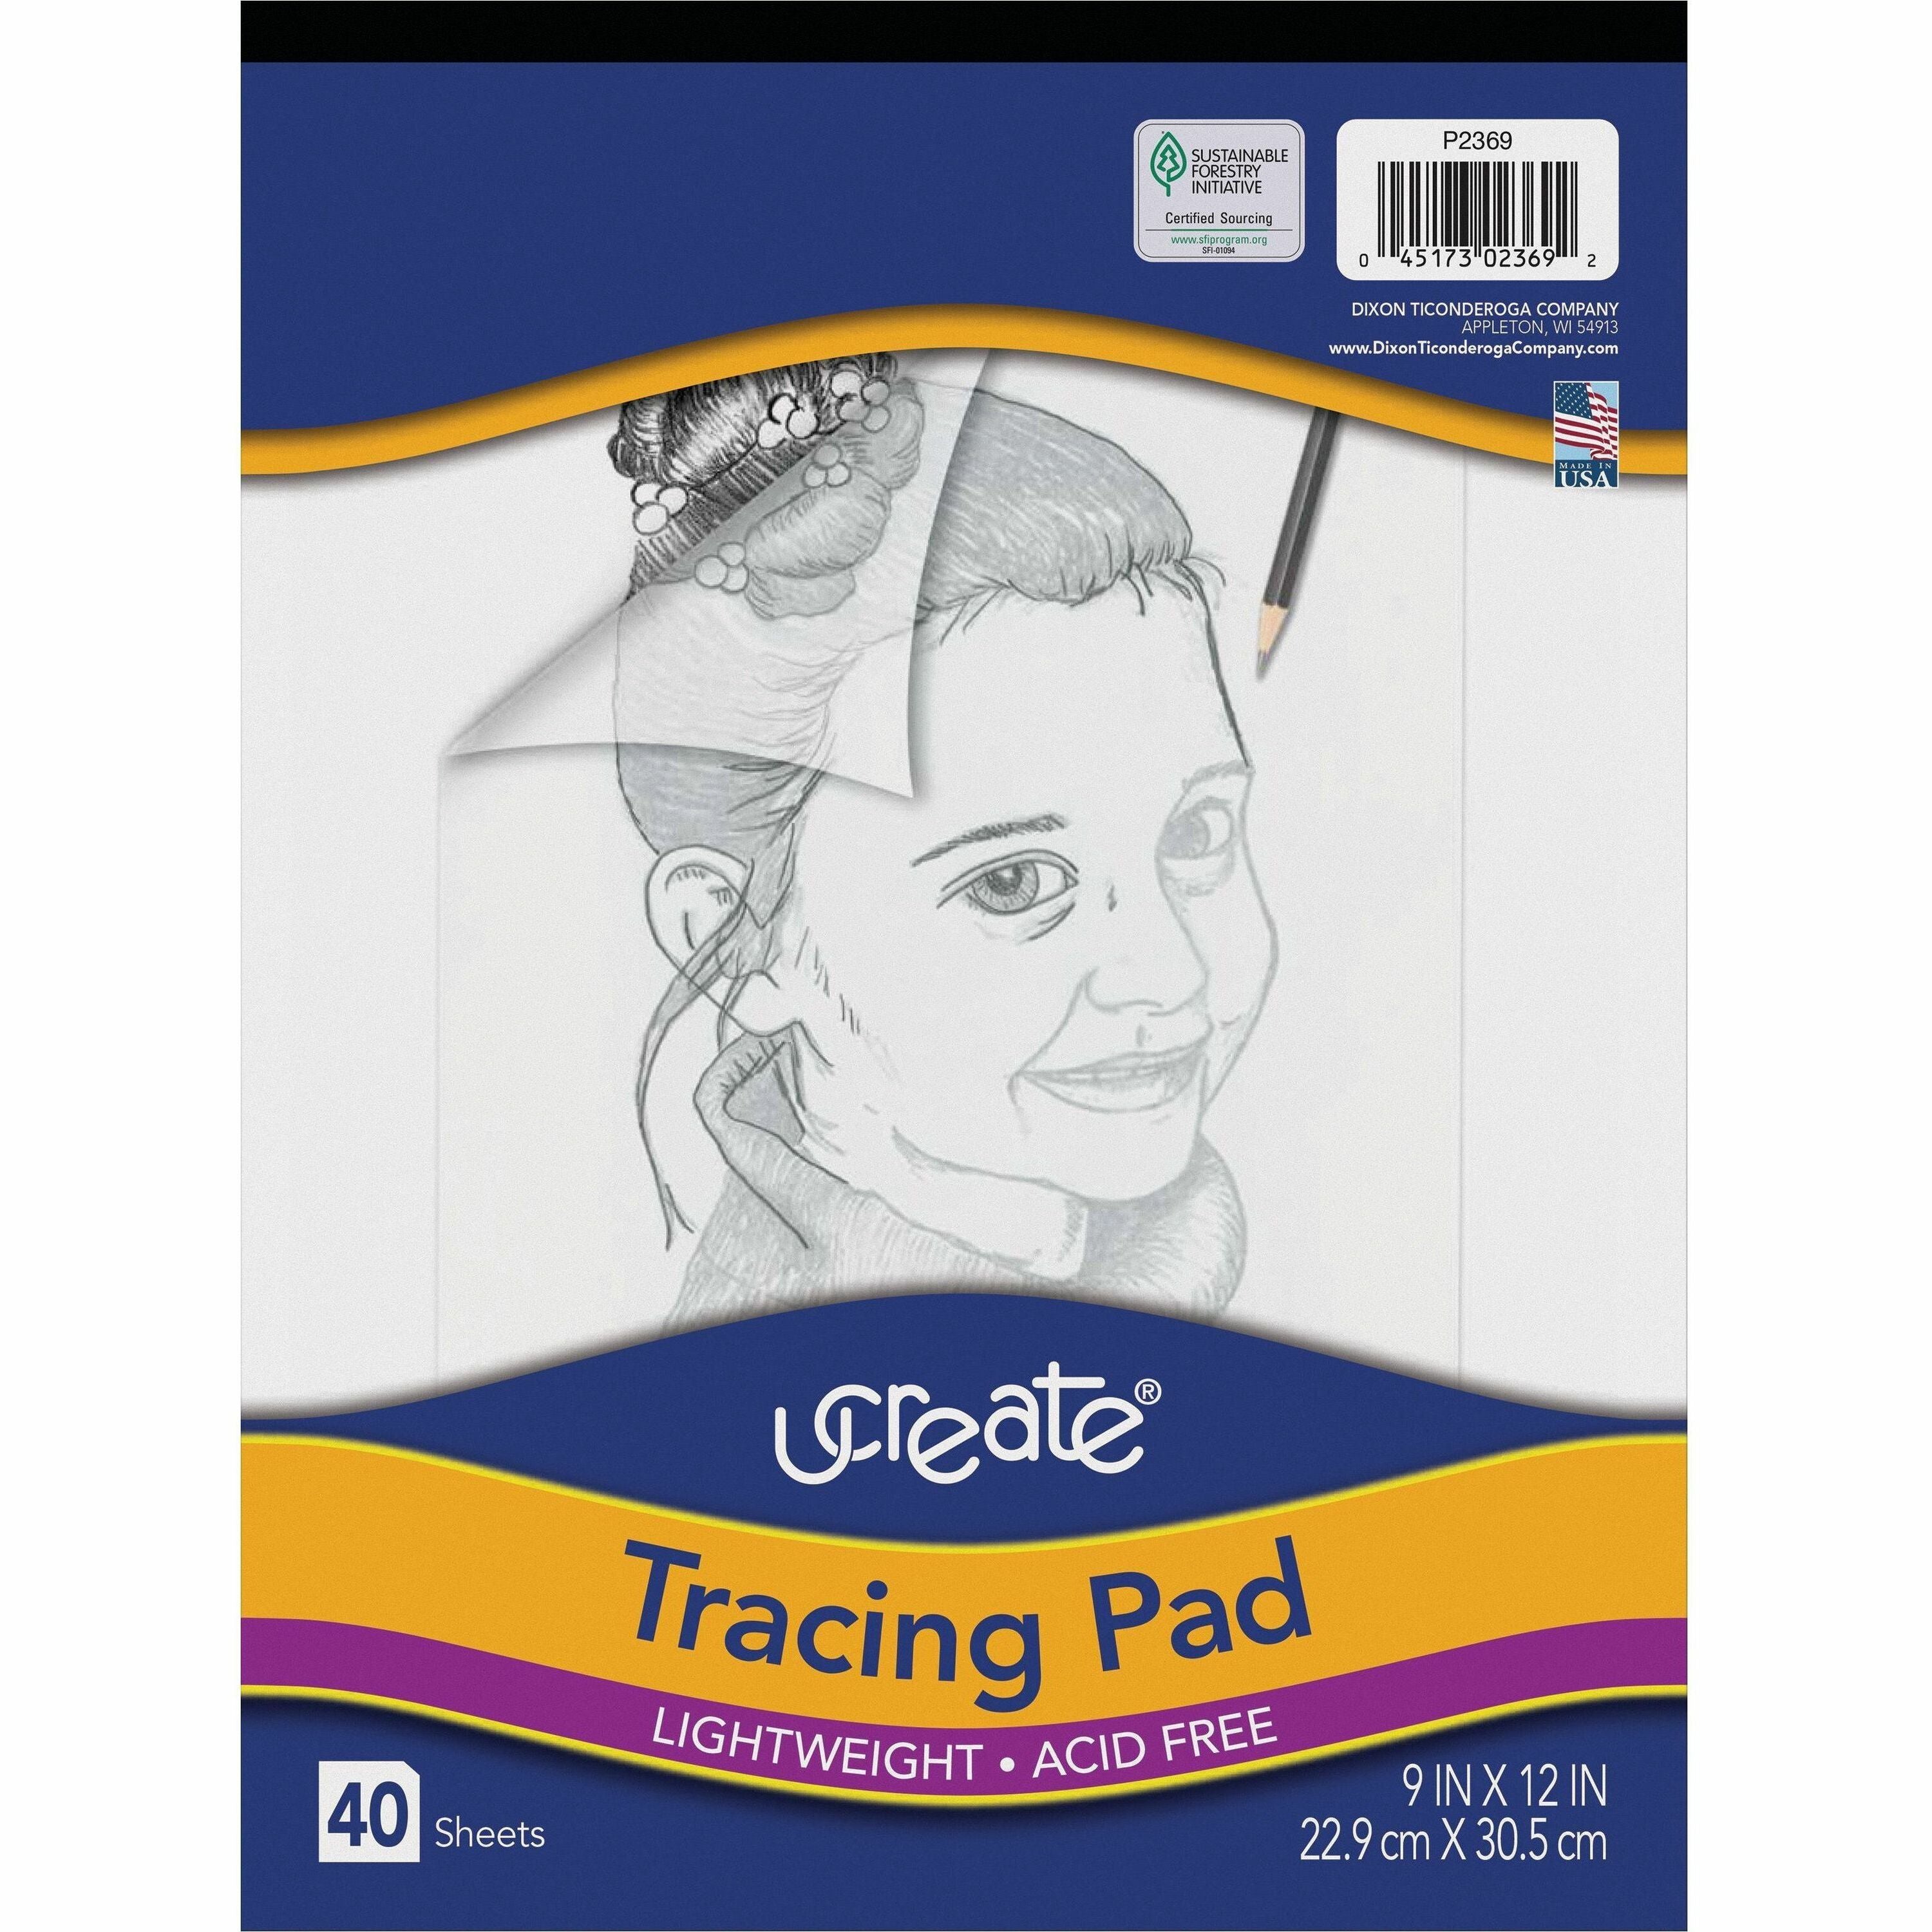 ucreate-tracing-pad-40-sheets-plain-unruled-margin-9-x-12-transparent-paper-bleed-free-40-pad_pac2369 - 1